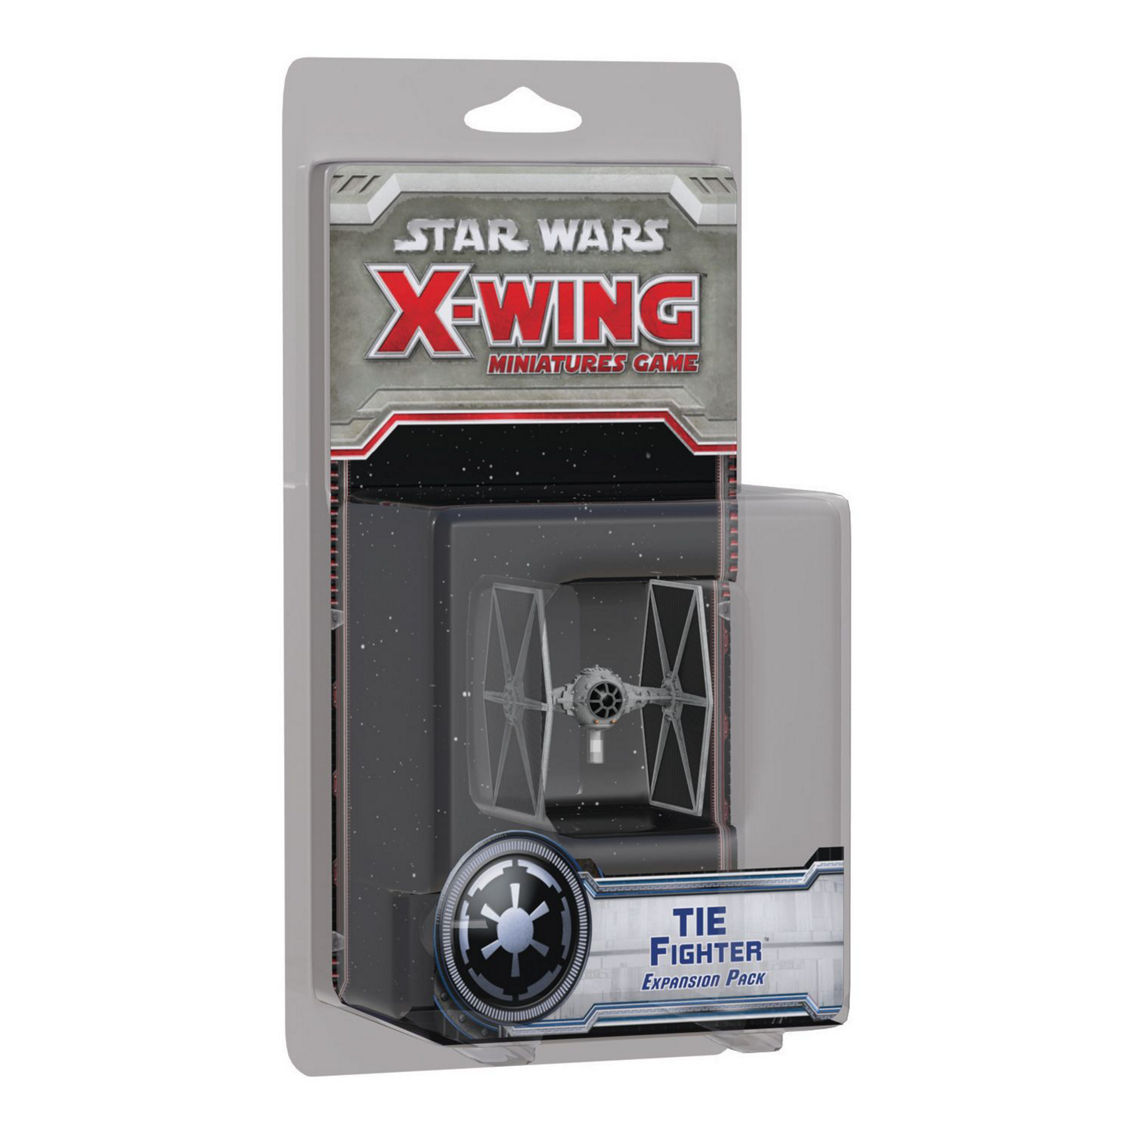 Fantasy Flight Games Star Wars X-Wing Miniatures Game - TIE Fighter Expansion Pack - Image 2 of 3